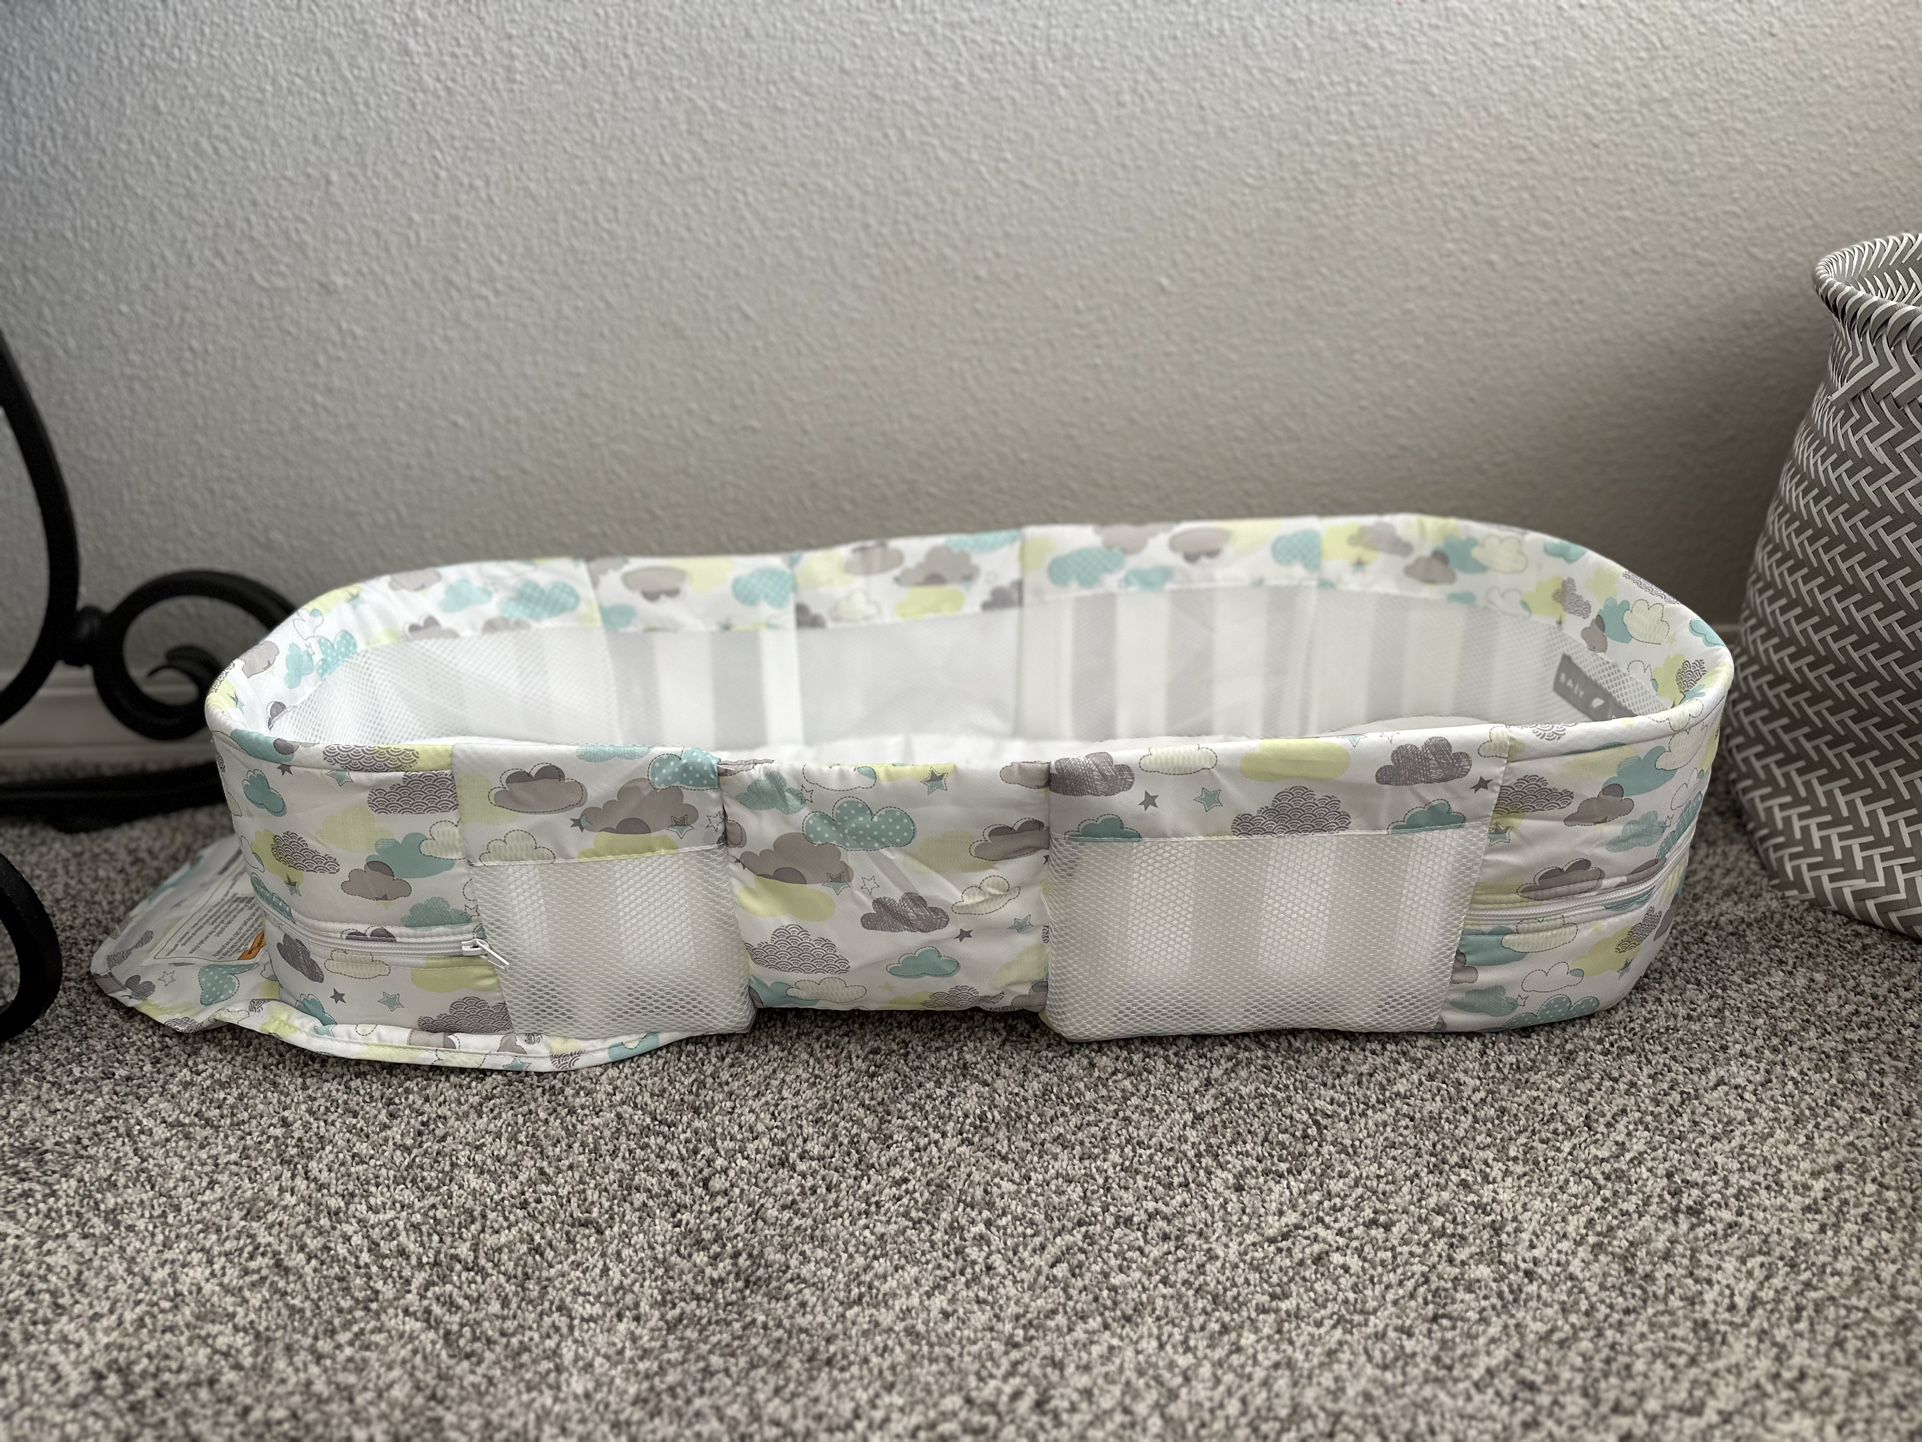 Baby Delight Snuggle Nest Infant Portable Lounger